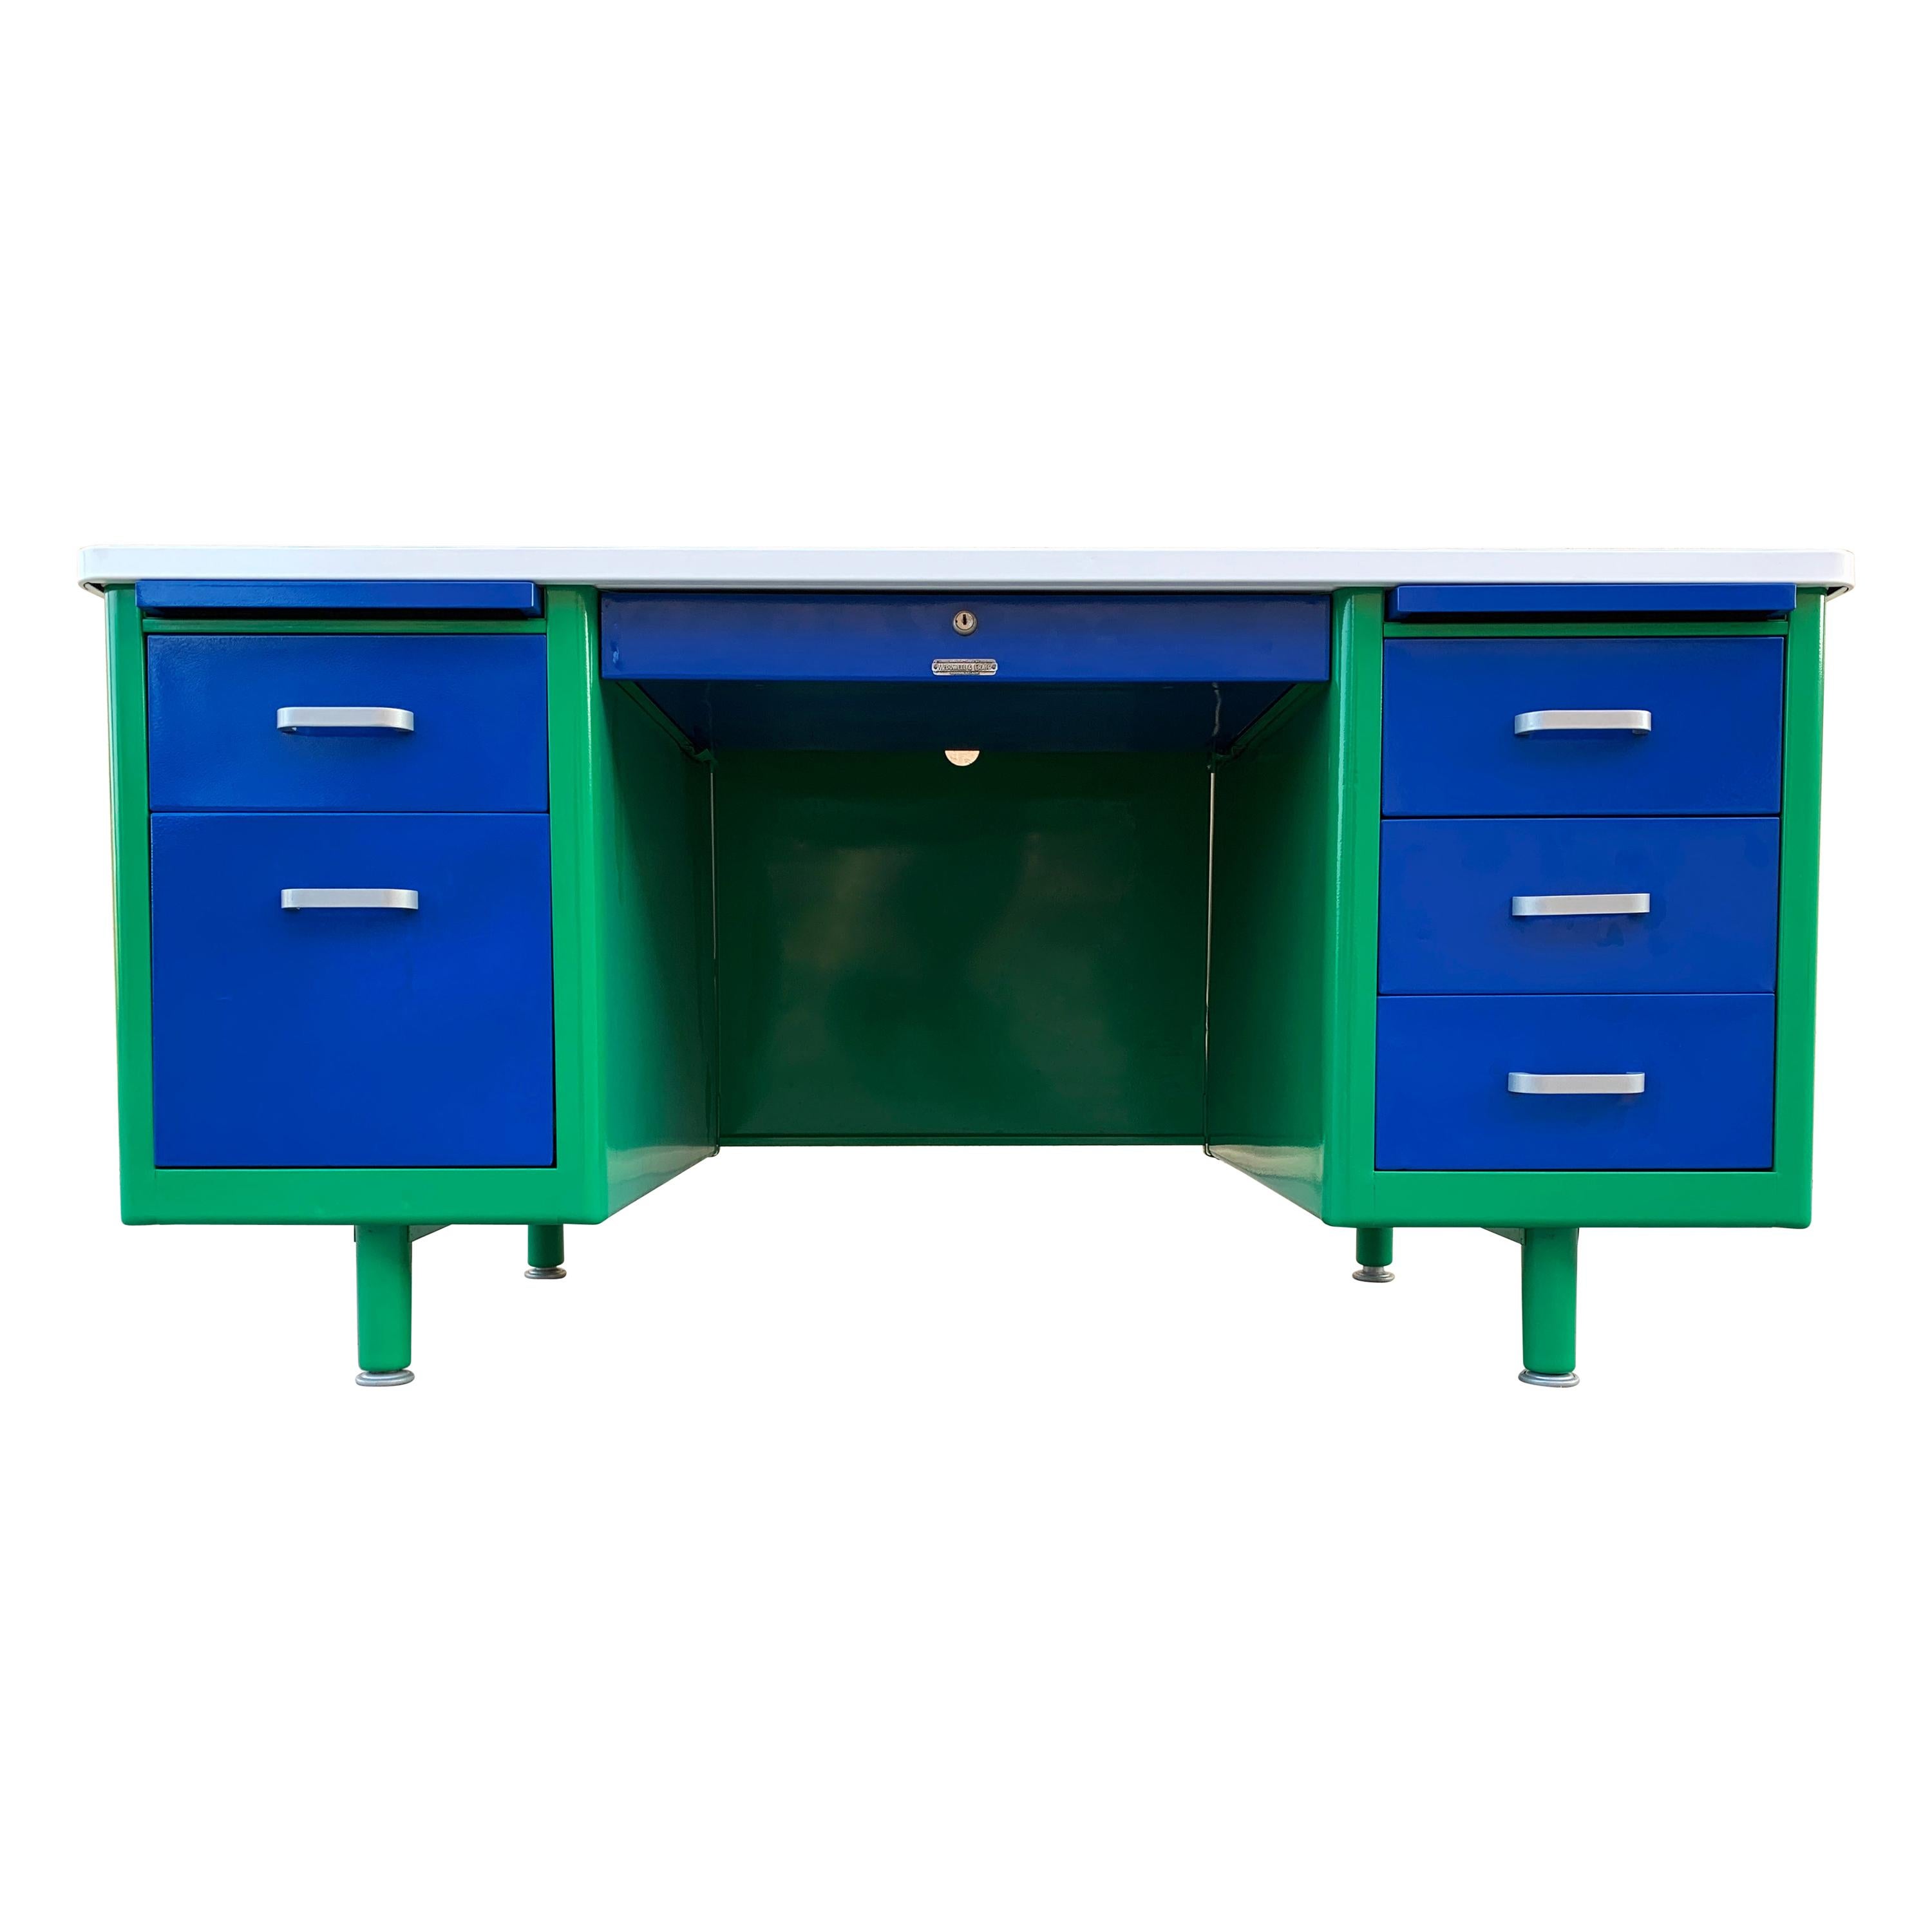 McDowell Craig Midcentury Tanker Desk Refinished in Bauhaus Colors, in Stock